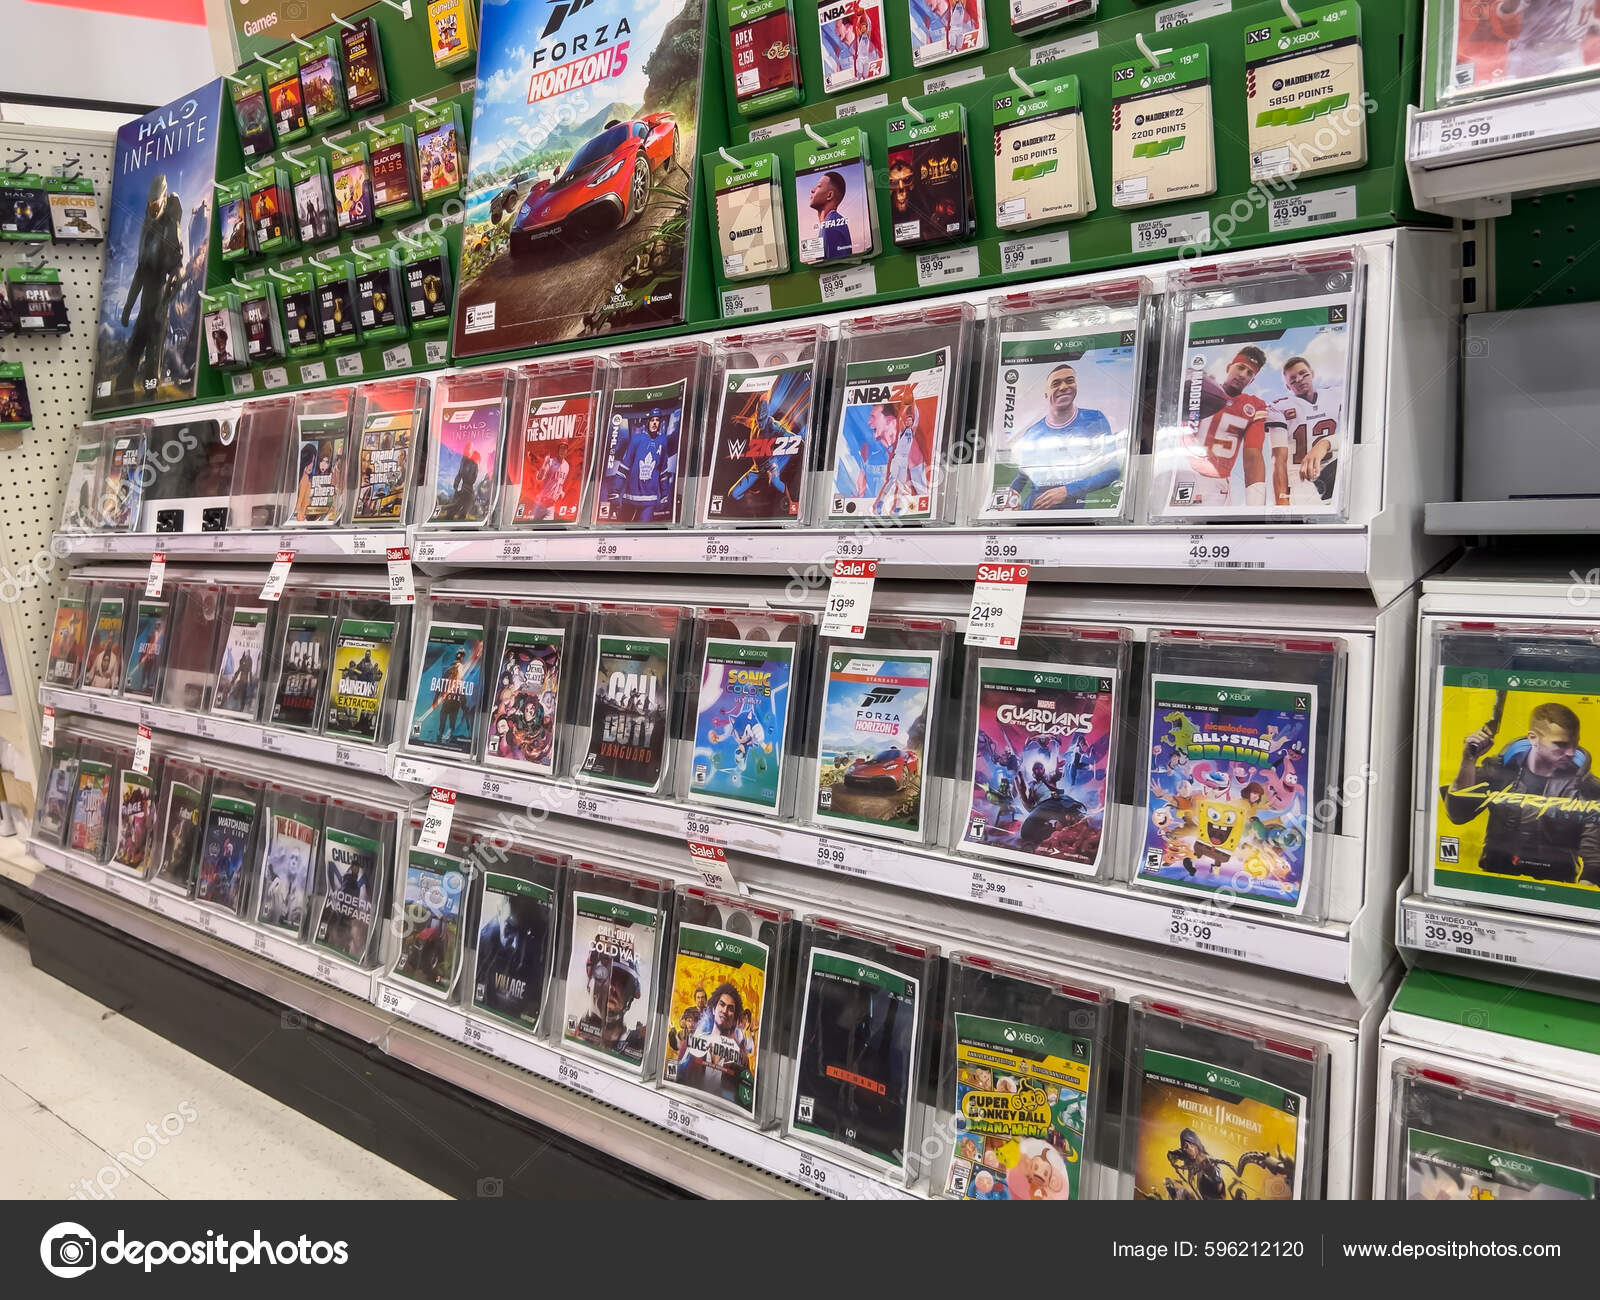 Xbox video games shalves editorial image. Image of store - 145521775